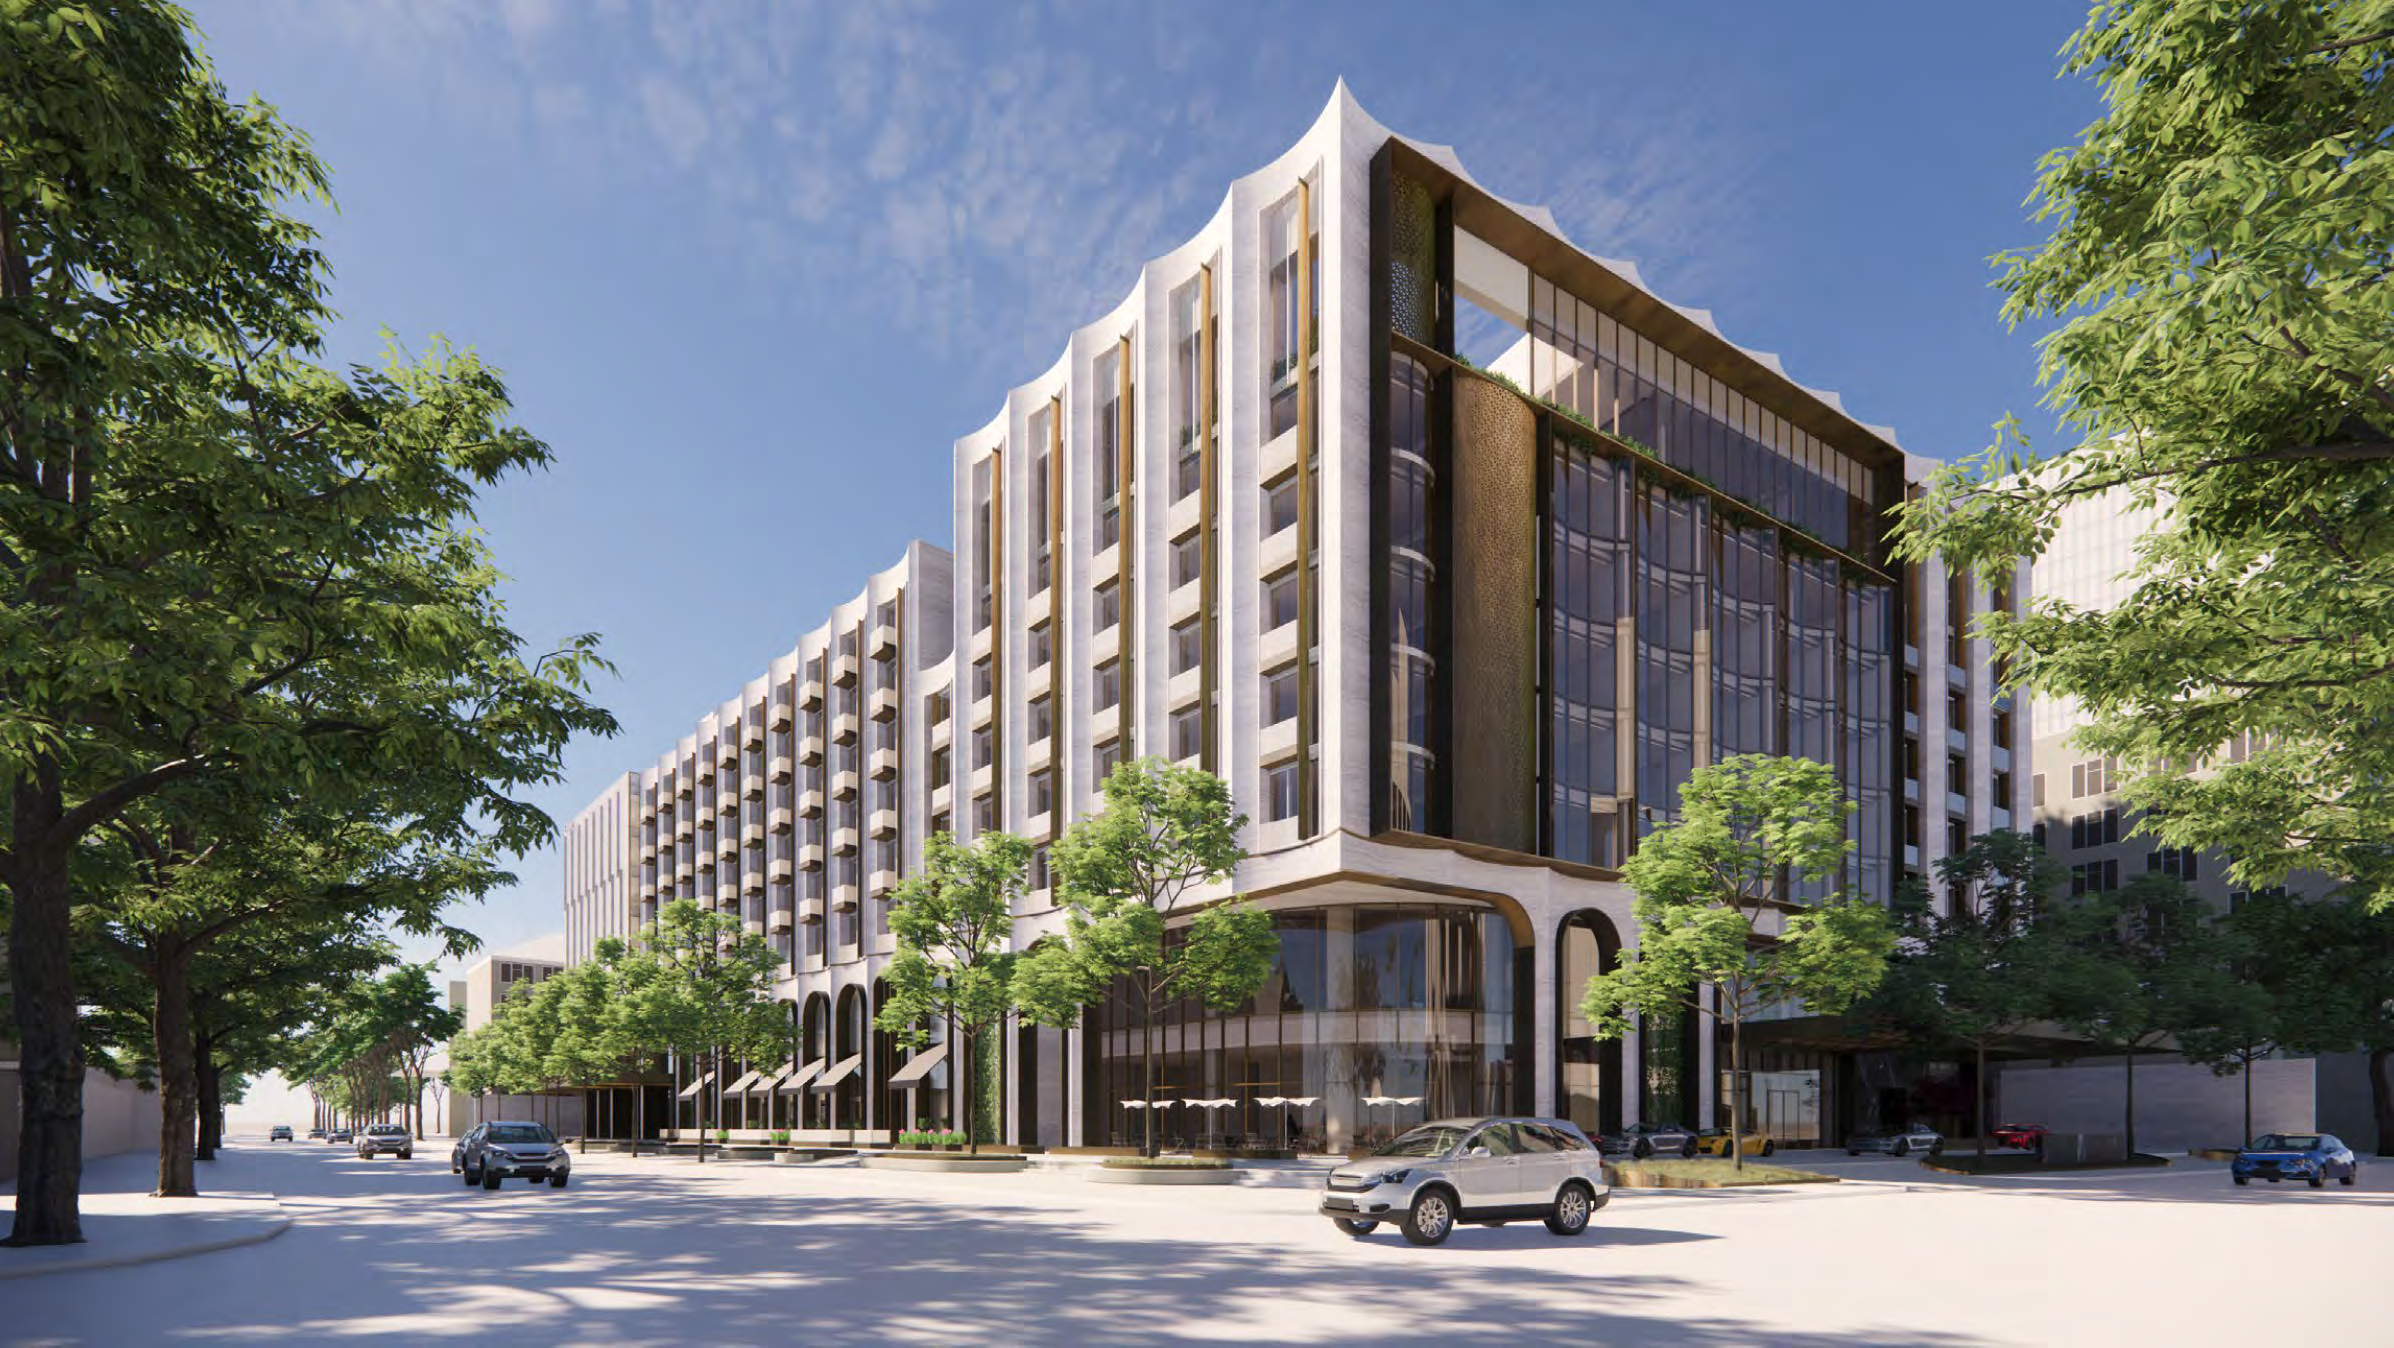 Accor reveals the first Fairmont city hotel to debut in Vietnam